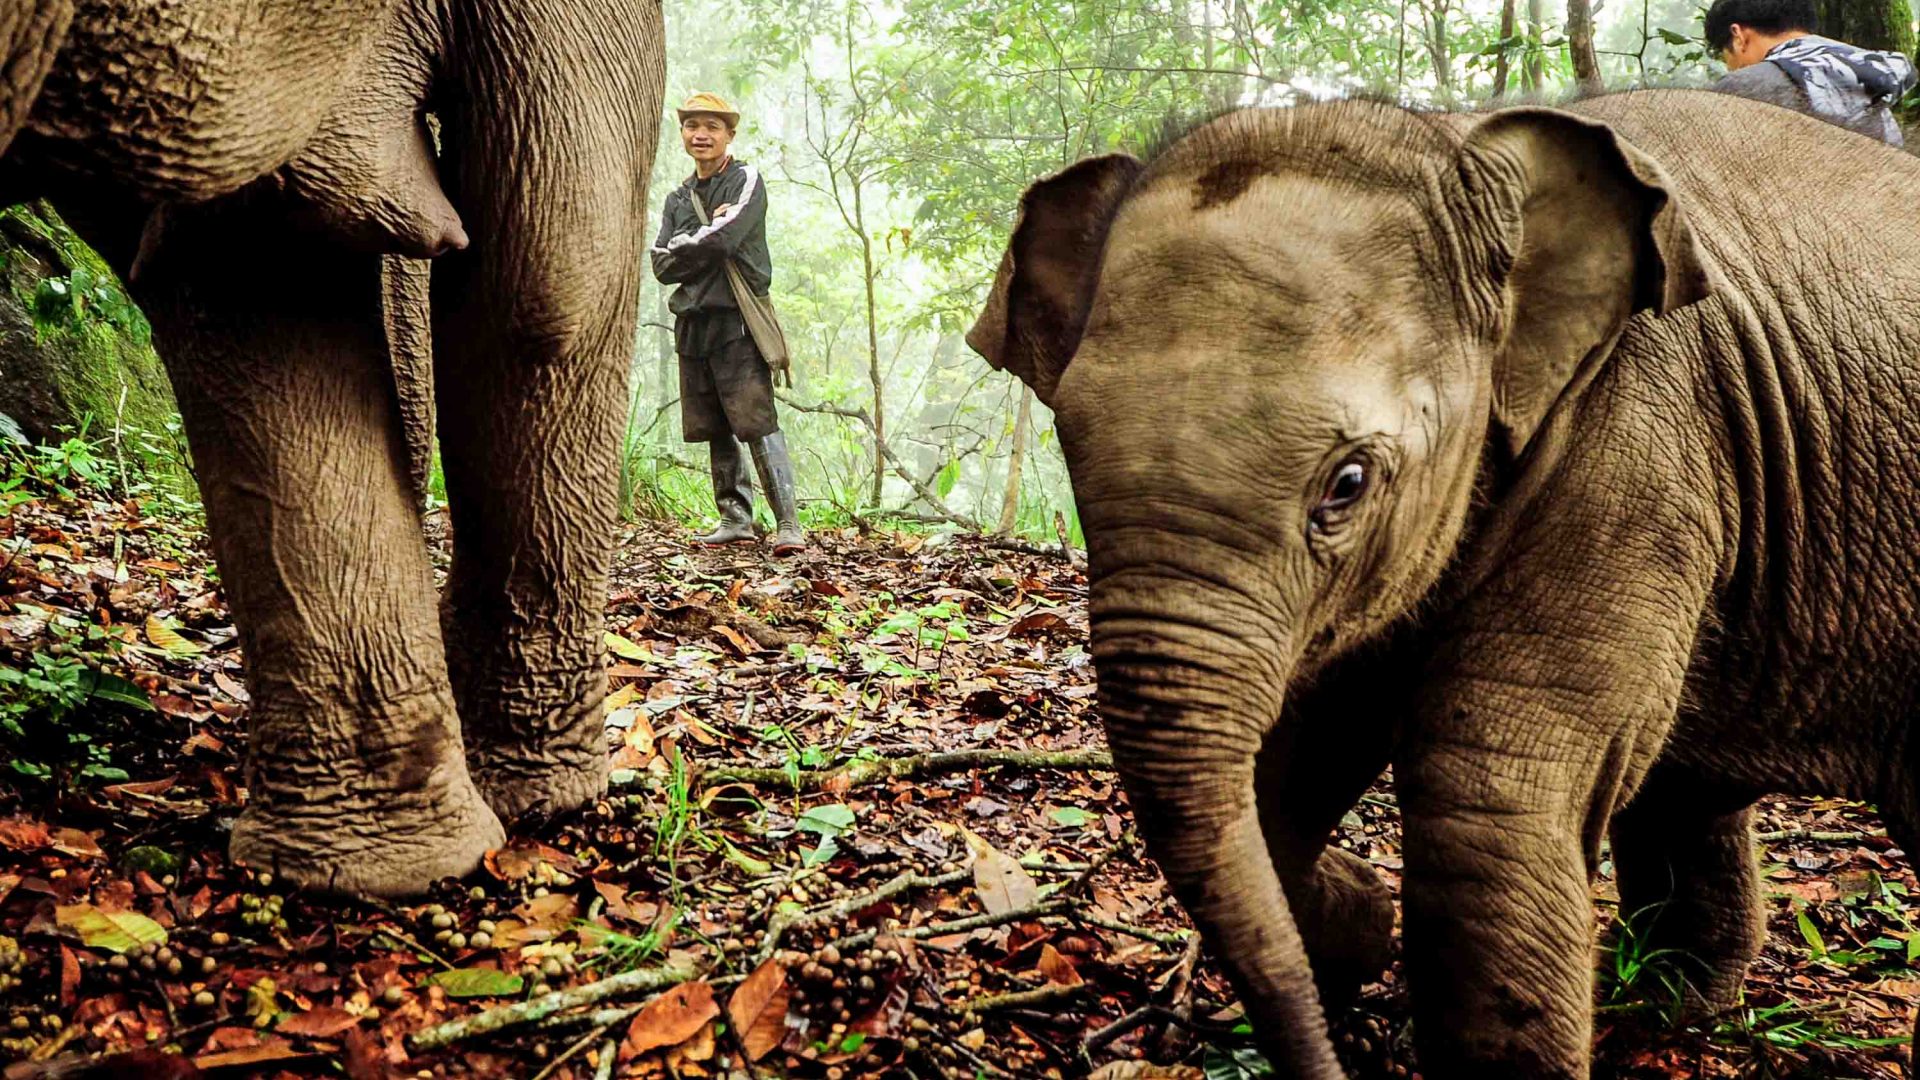 A mahout stands in the background while an adult and a baby elephant stand in the foreground.